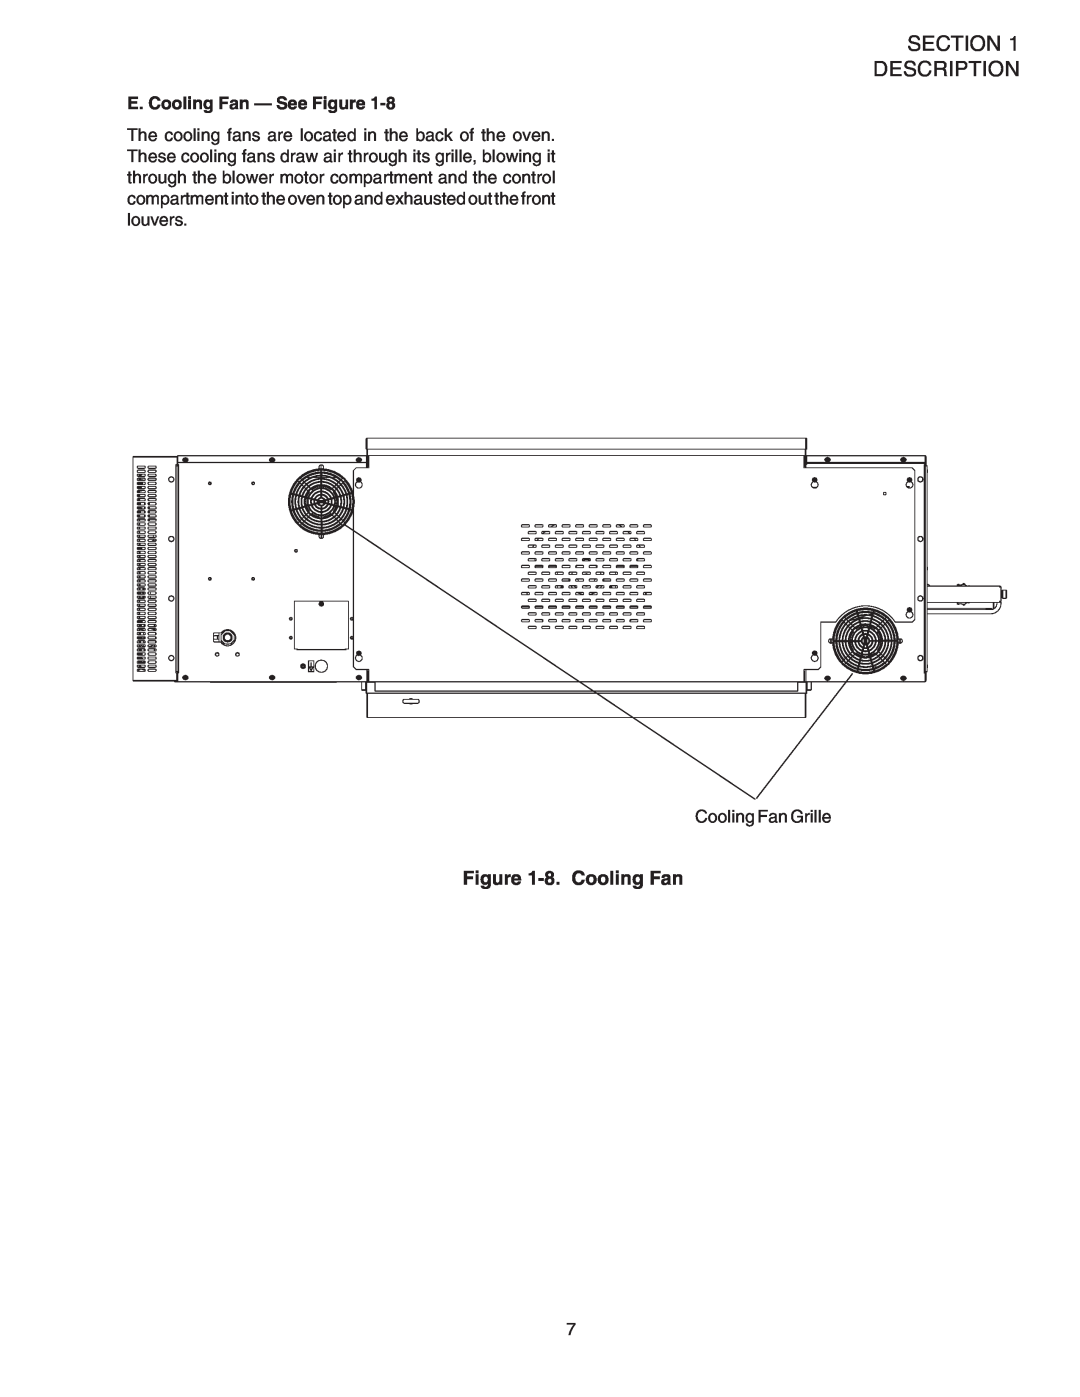 Middleby Marshall PS540G installation manual Section Description, 8. Cooling Fan, E. Cooling Fan - See Figure 